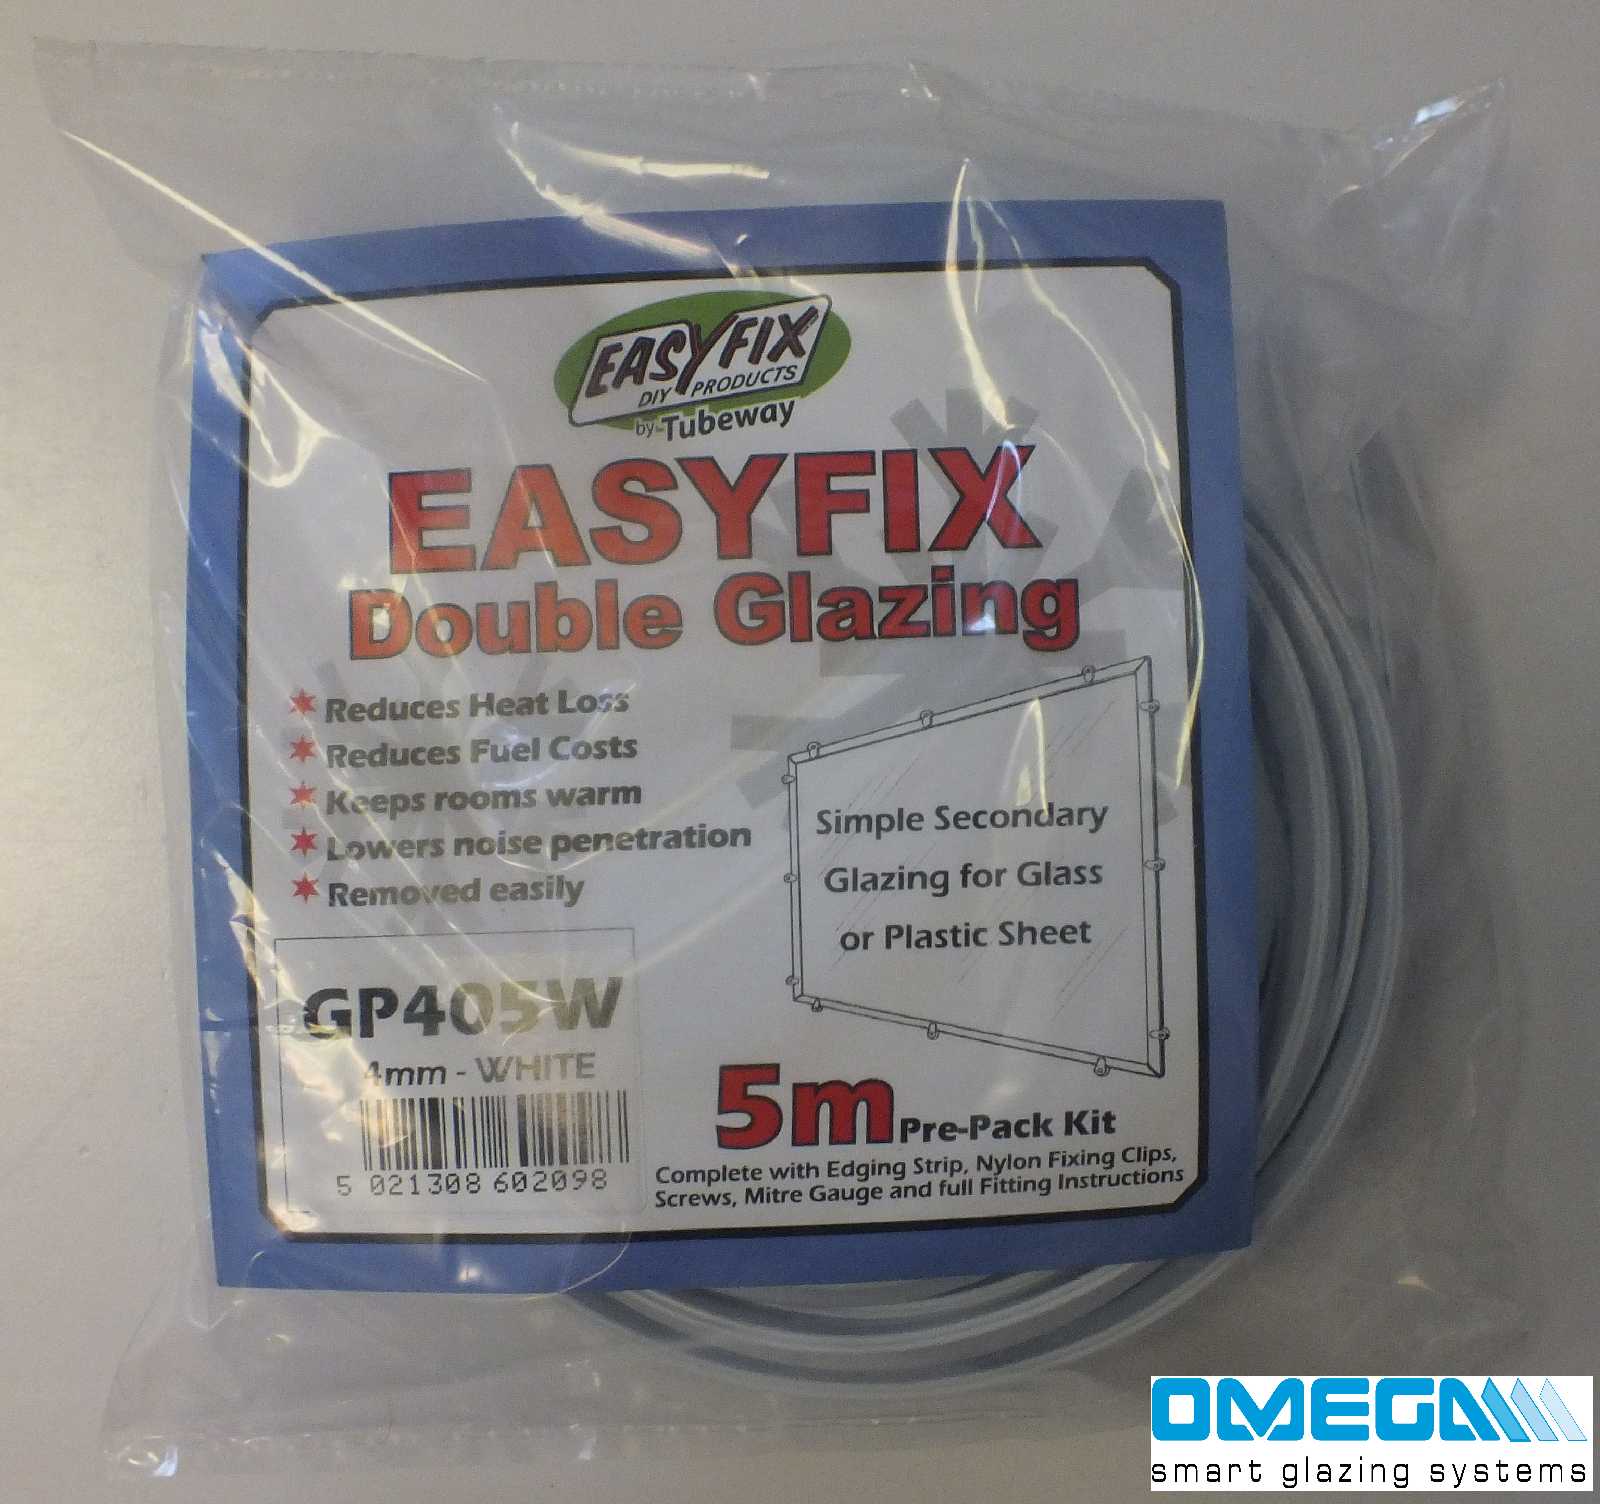 Easyfix Clipglaze Edging Kit - 5m roll of edging for 2mm Glazing Thickness, Clear